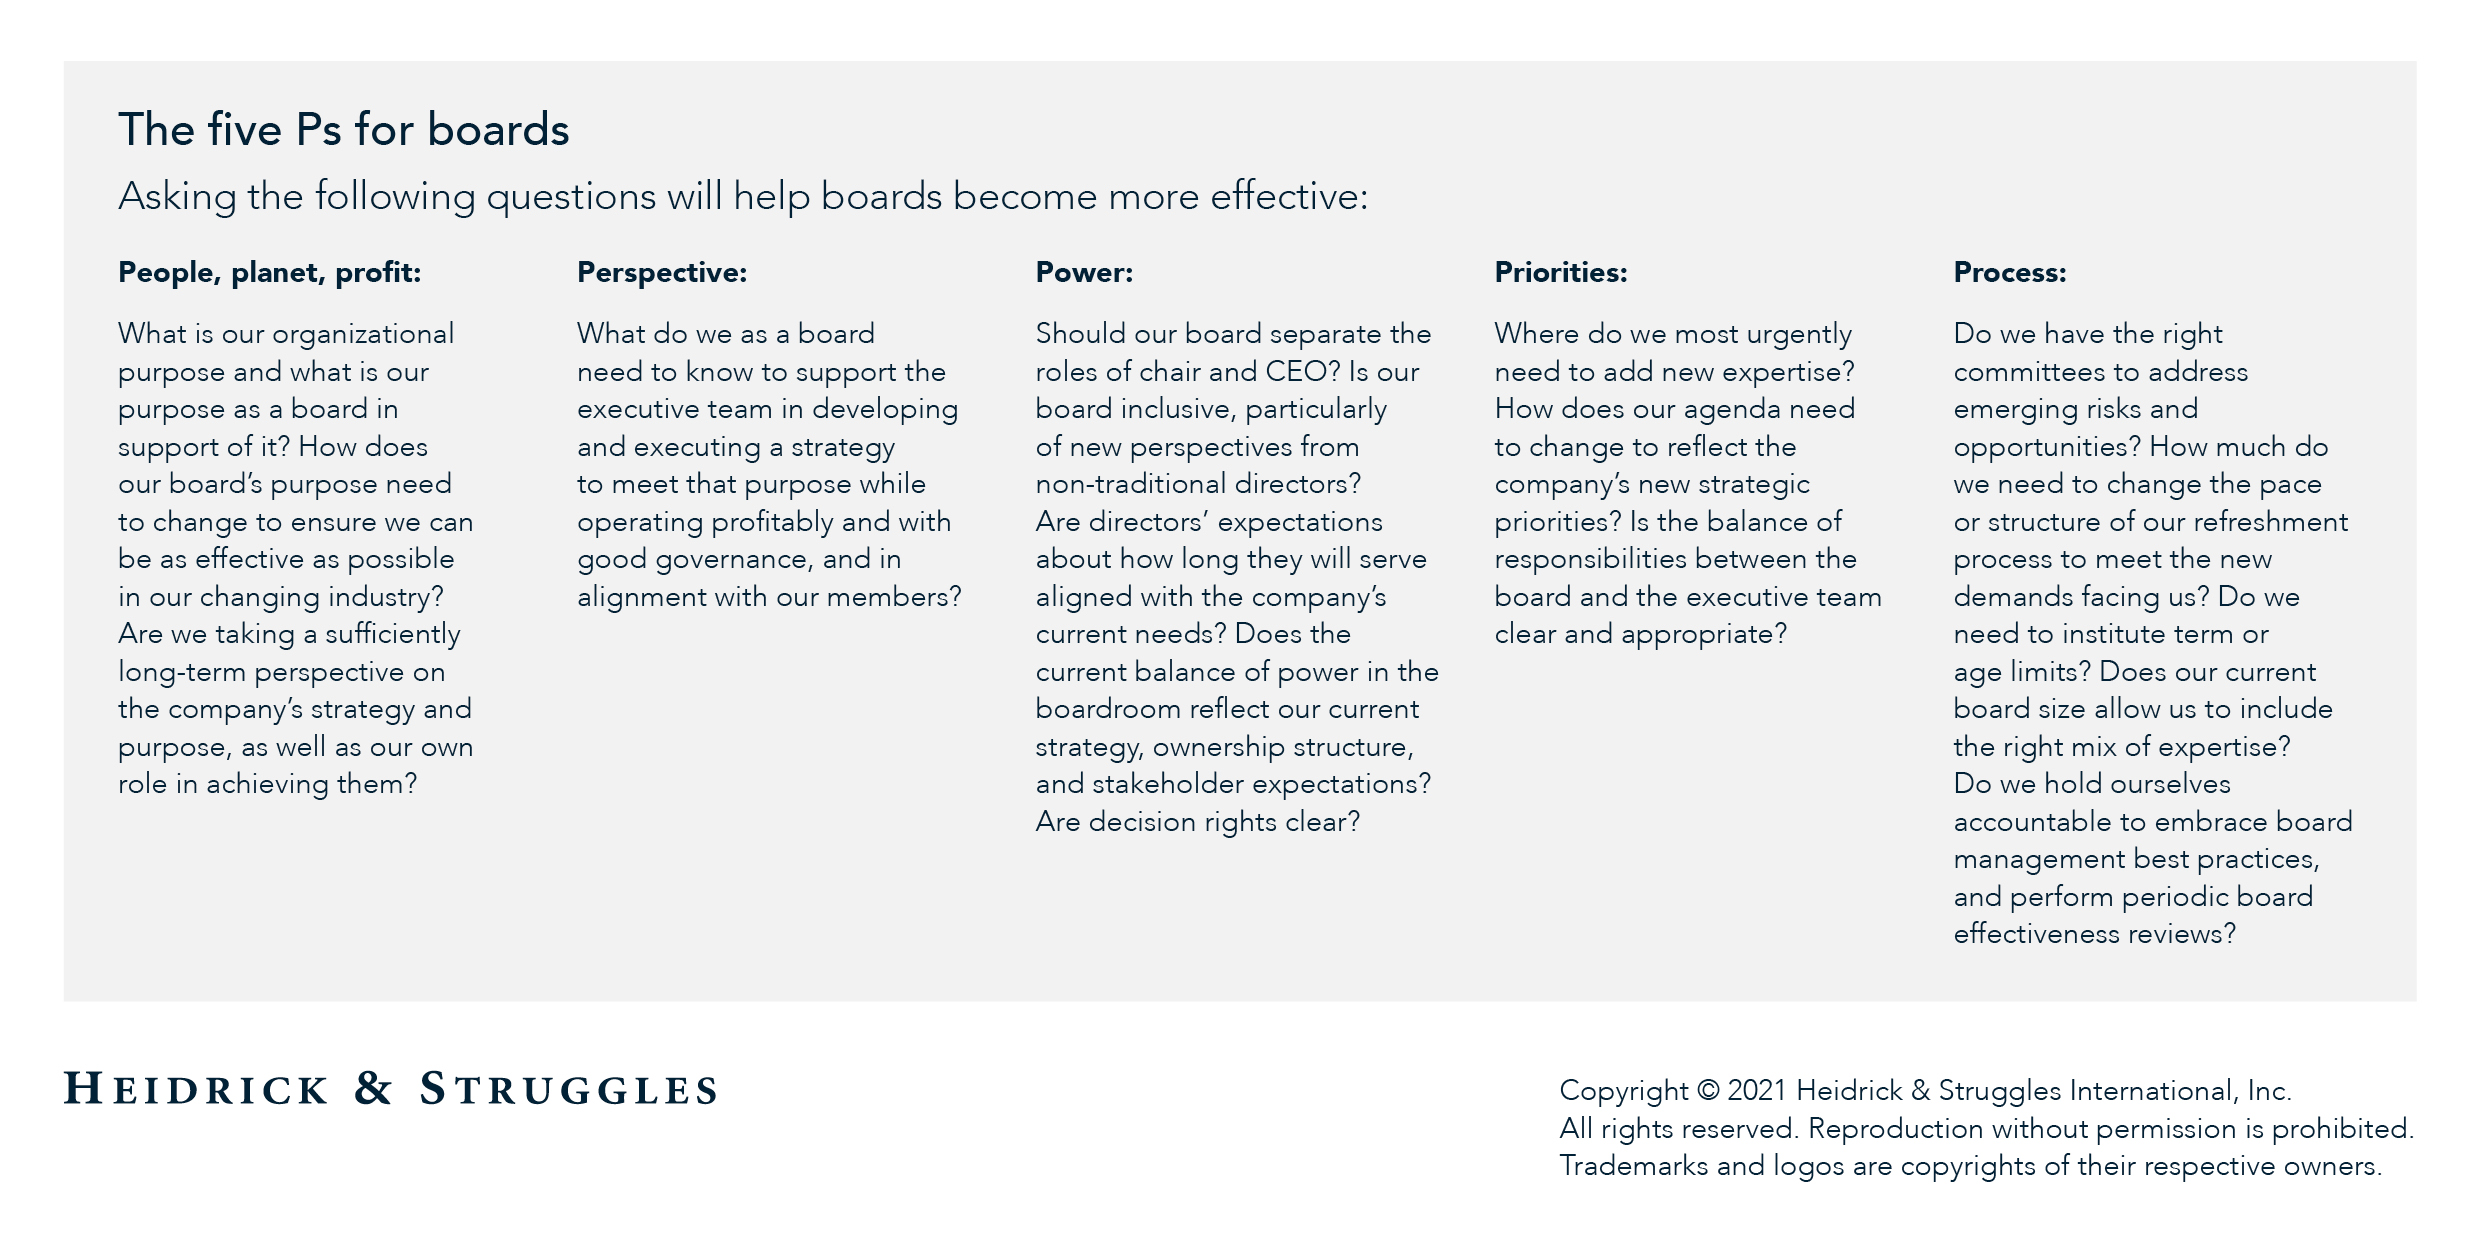 How US insurers can improve board effectiveness - chart image